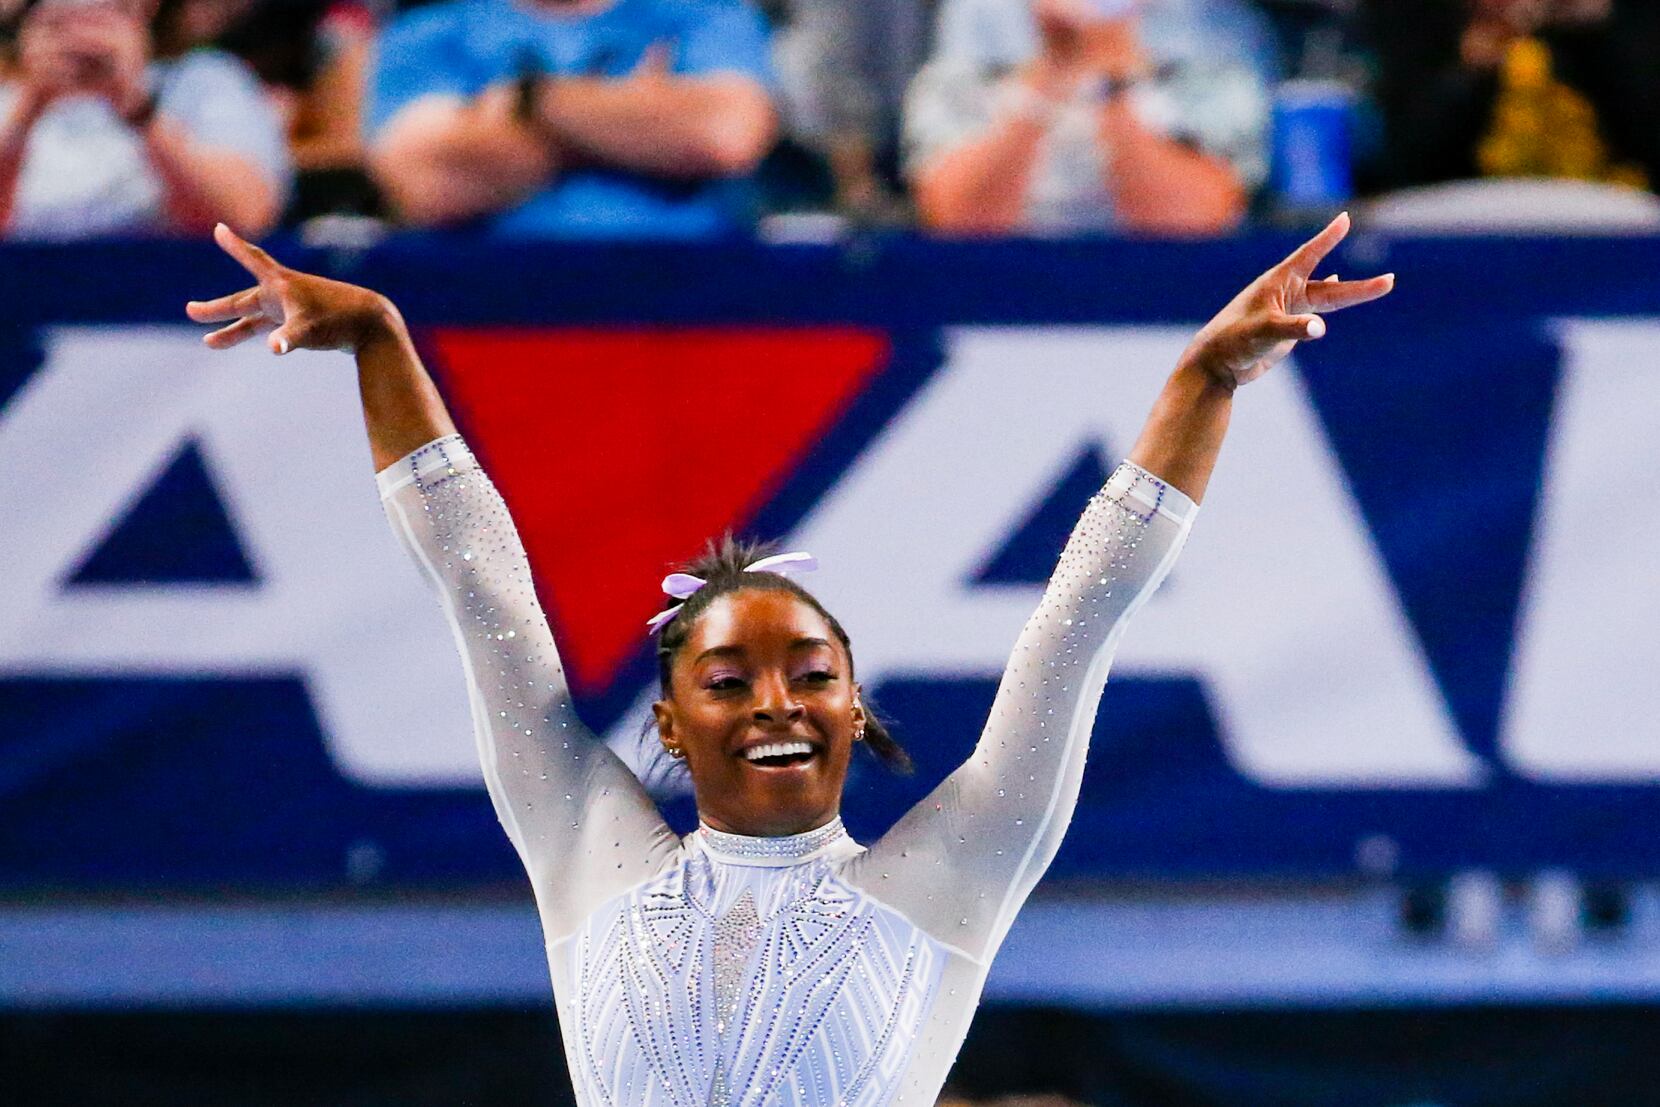 Gymnastics: Simone Biles dazzles in first competition since Tokyo Olympics, News